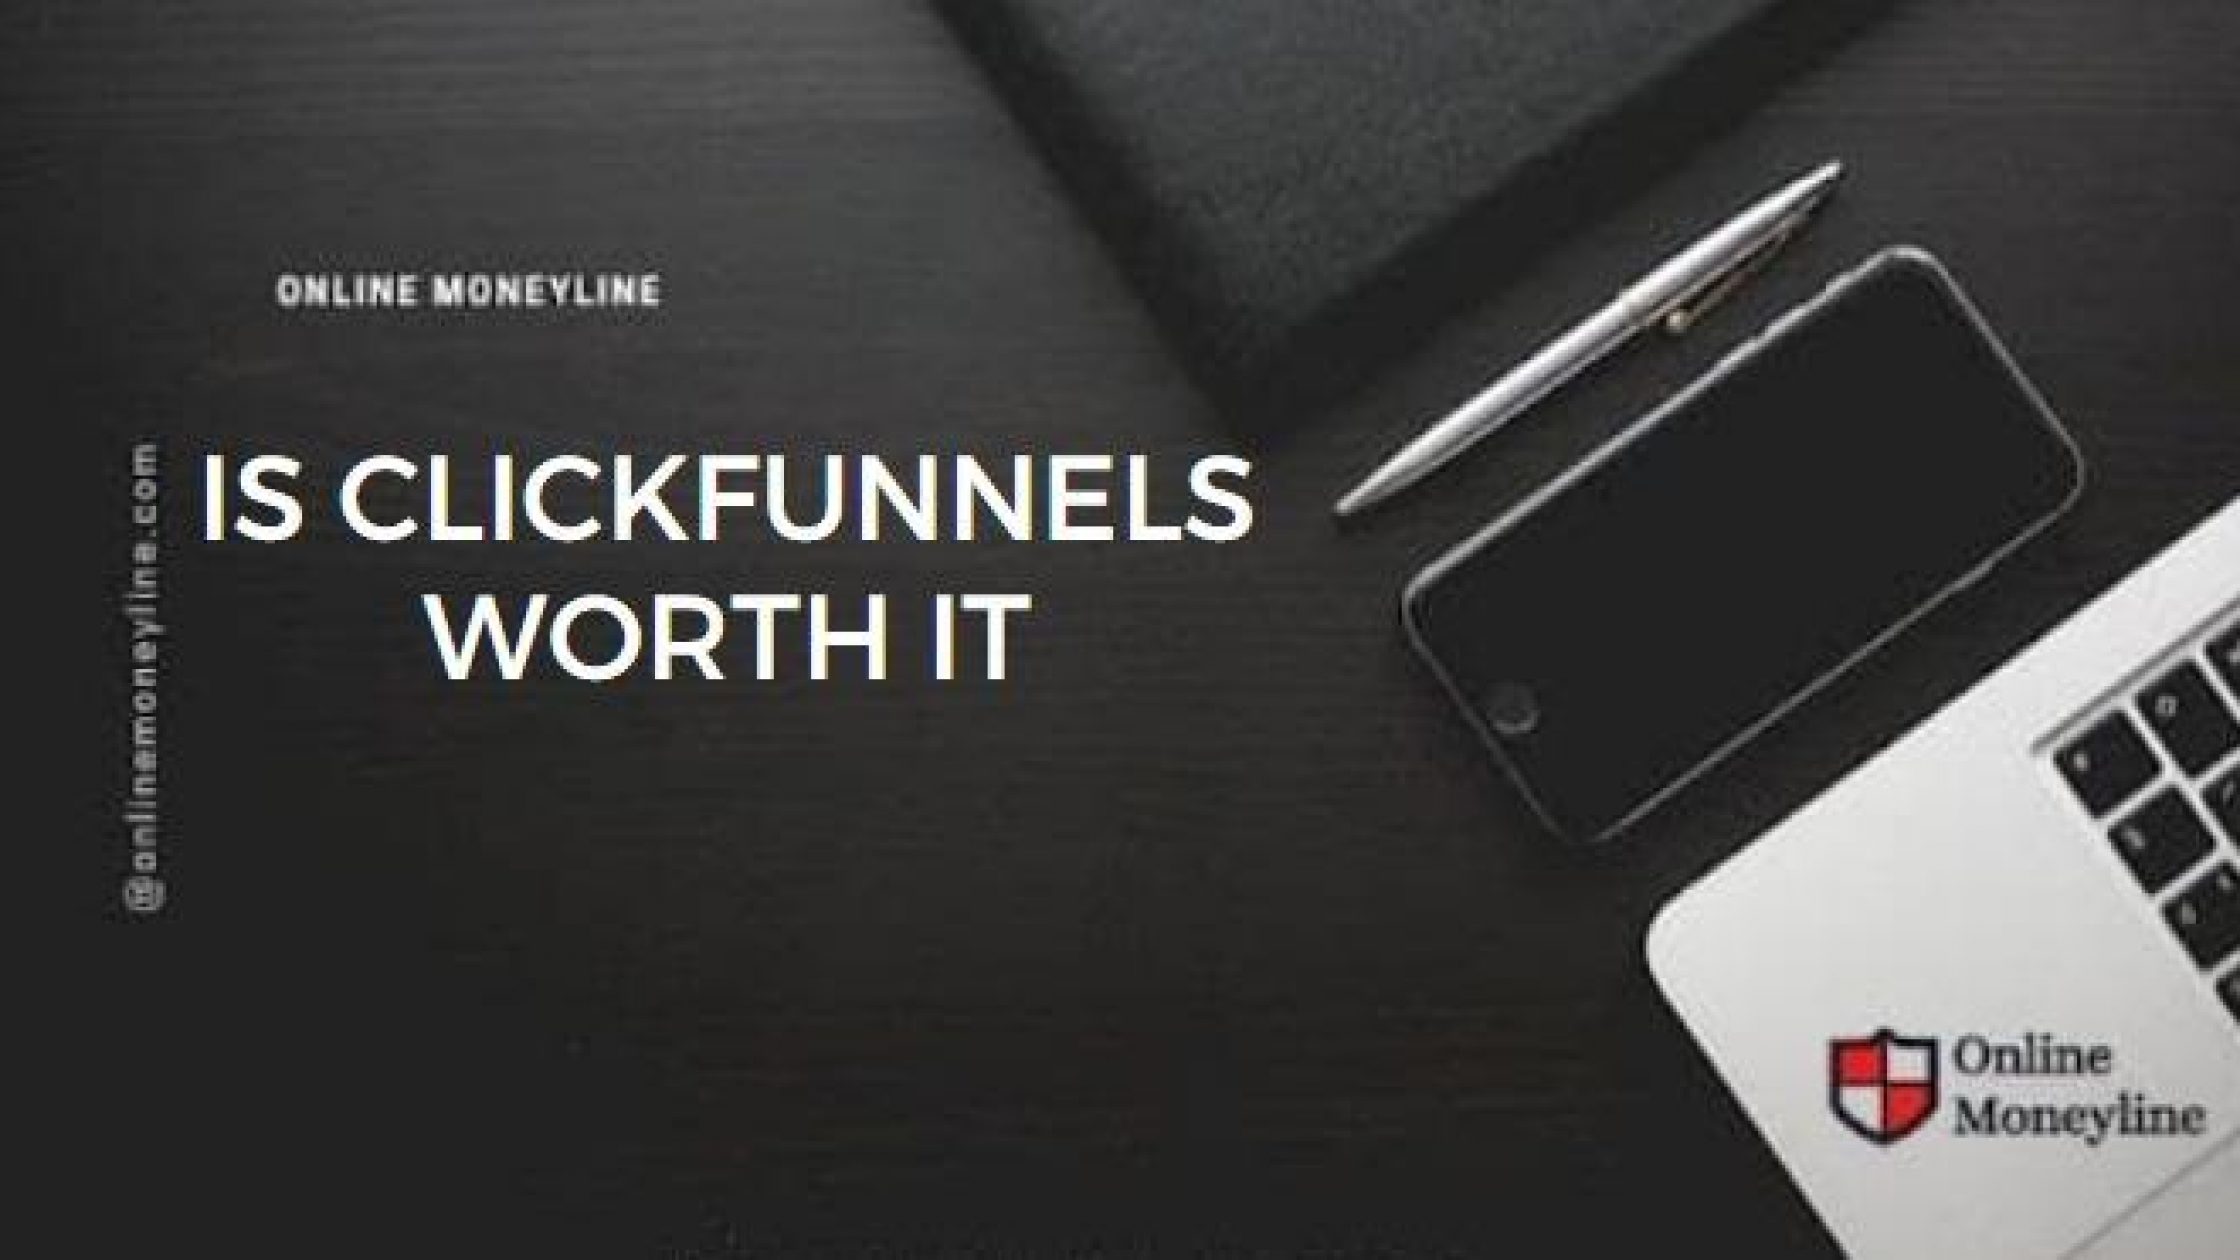 Is ClickFunnels worth